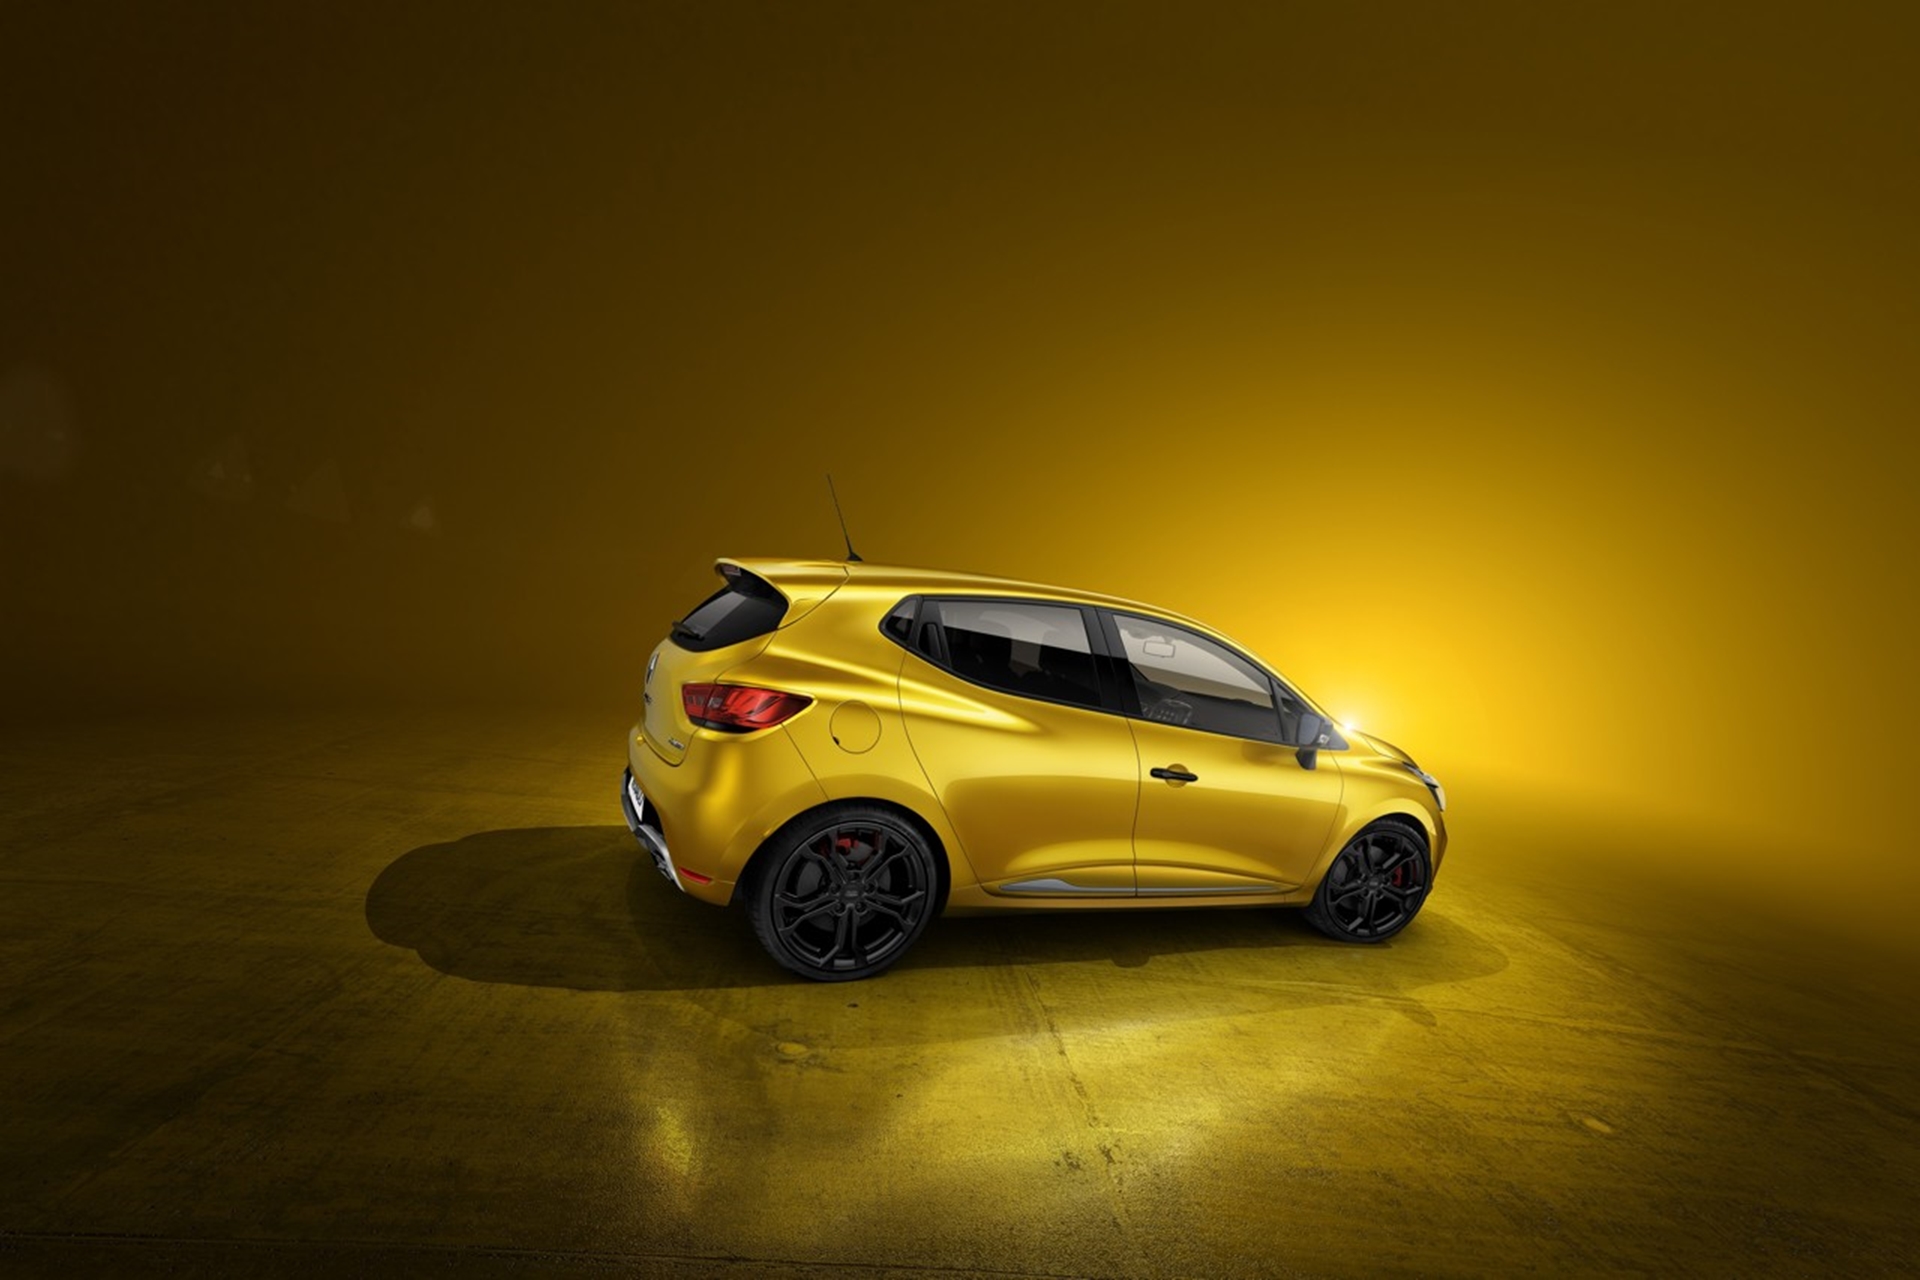 New Renault Clio R.S. 200 EDC : sporty performance can also be energy-efficient